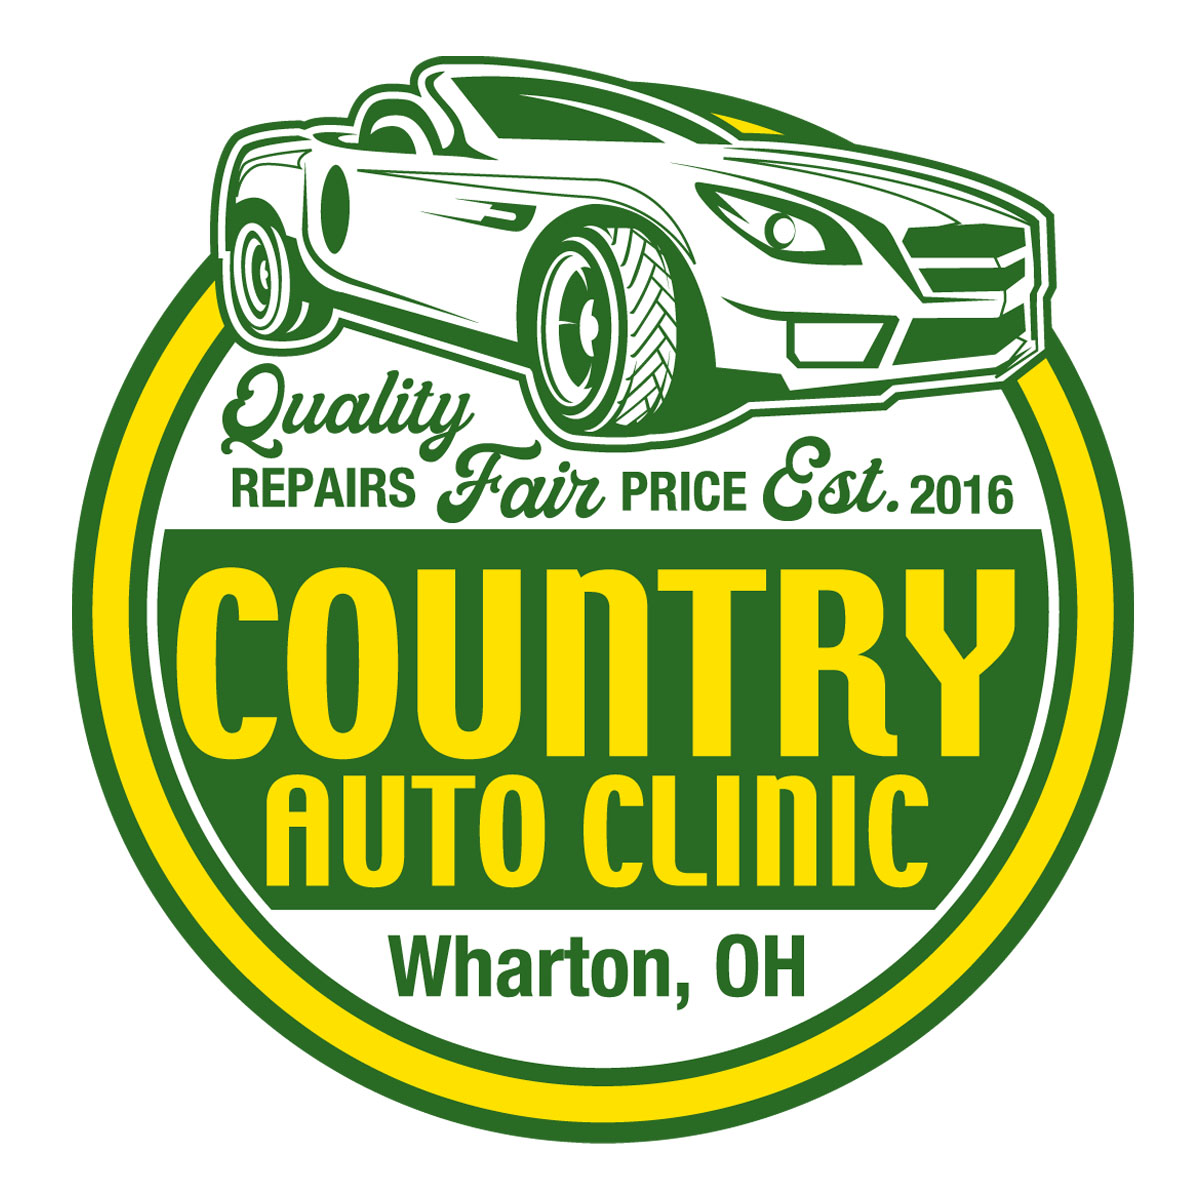 COUNTRY AUTO CLINIC, LLC